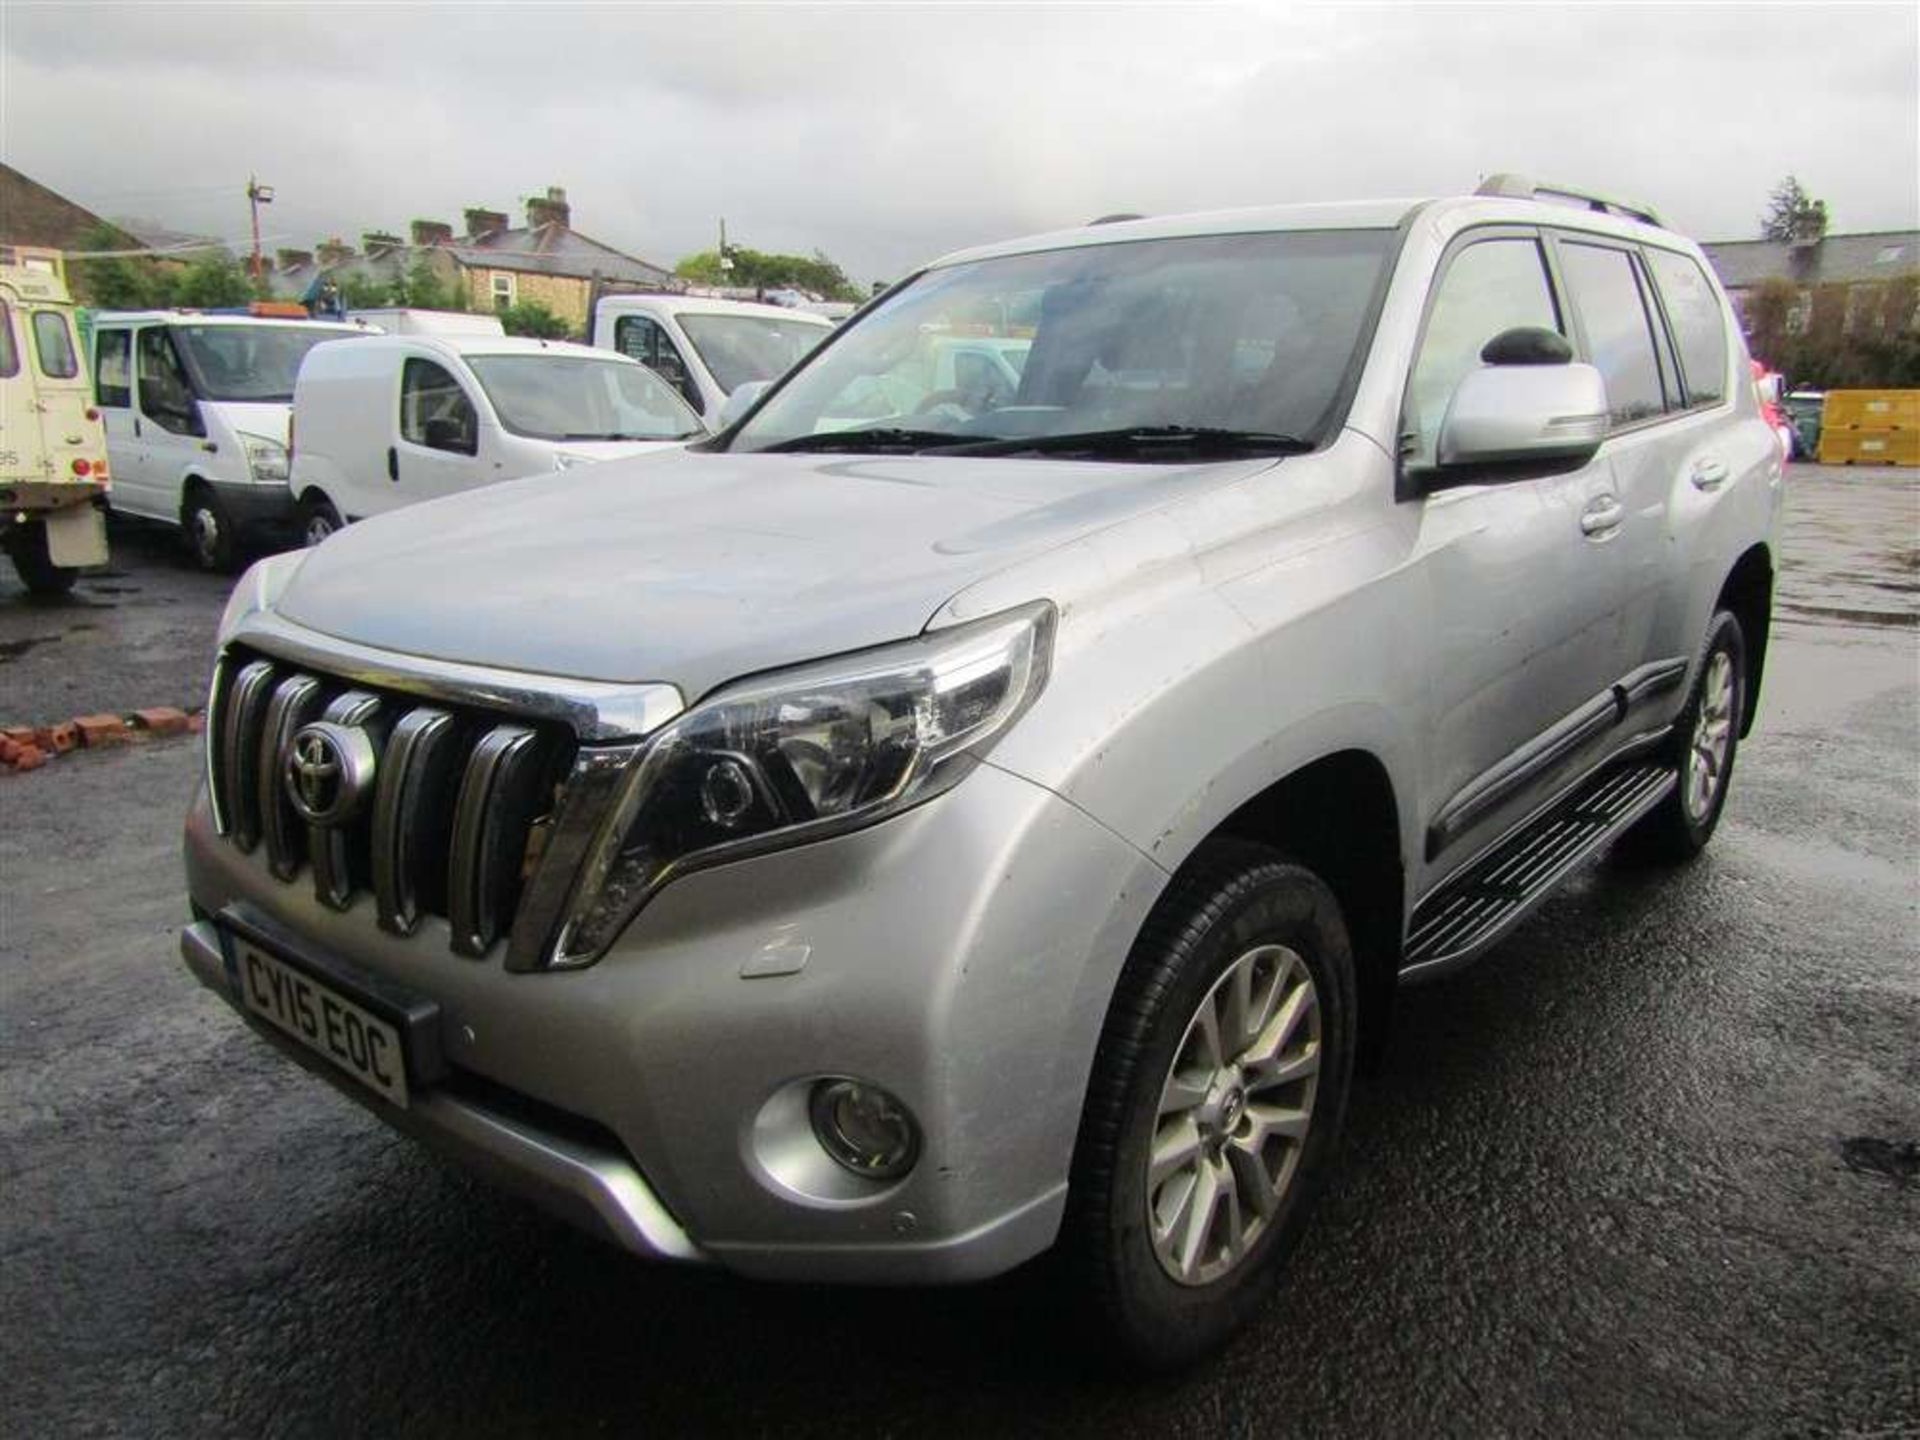 2015 15 reg Toyota Land Cruiser Icon D-4D Auto (Direct Council) - Image 6 of 6